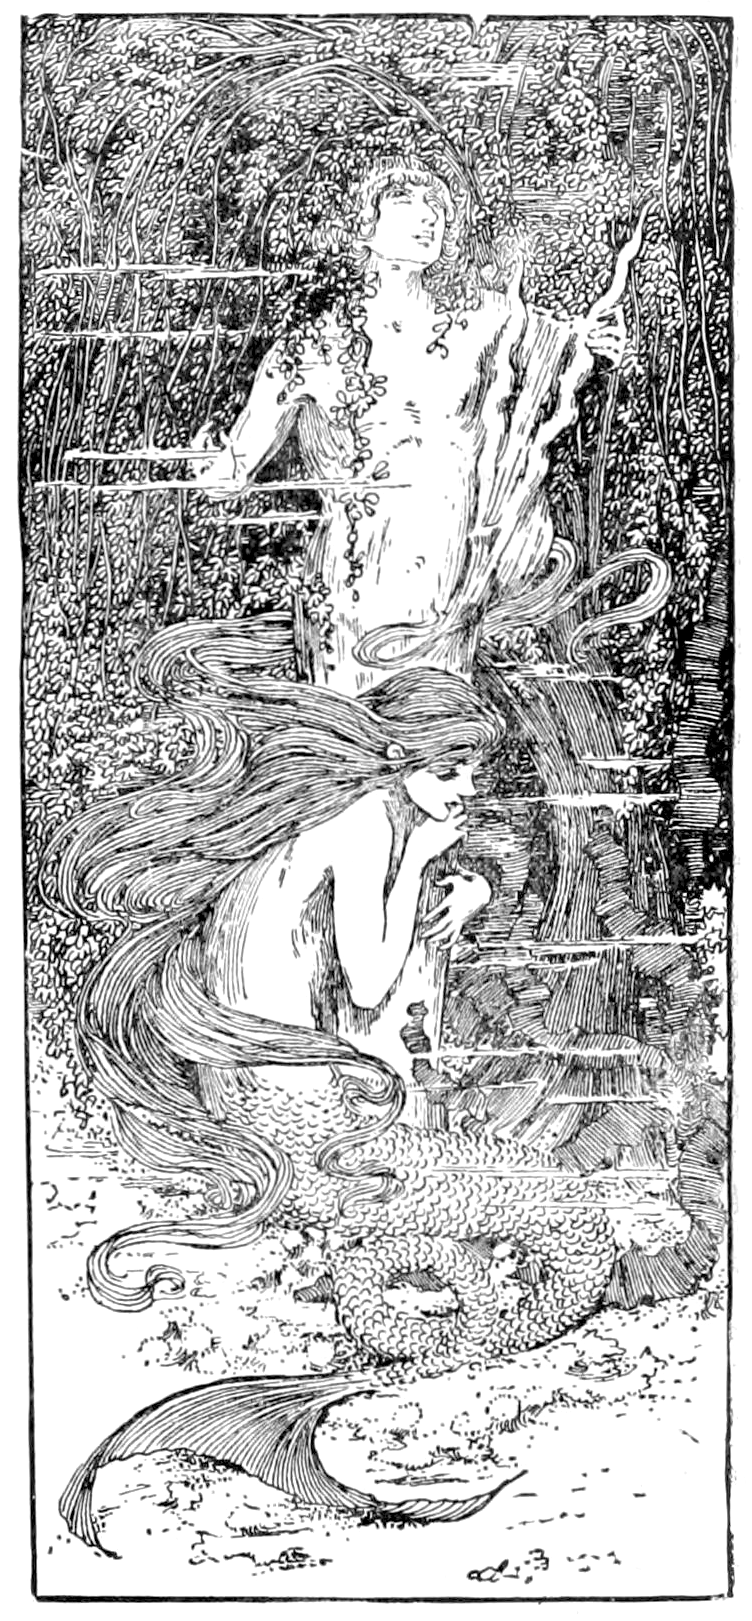 The Little Mermaid illustration from "The fairy tales of Hans Christian Andersen" (Source: Wikimedia Commons)